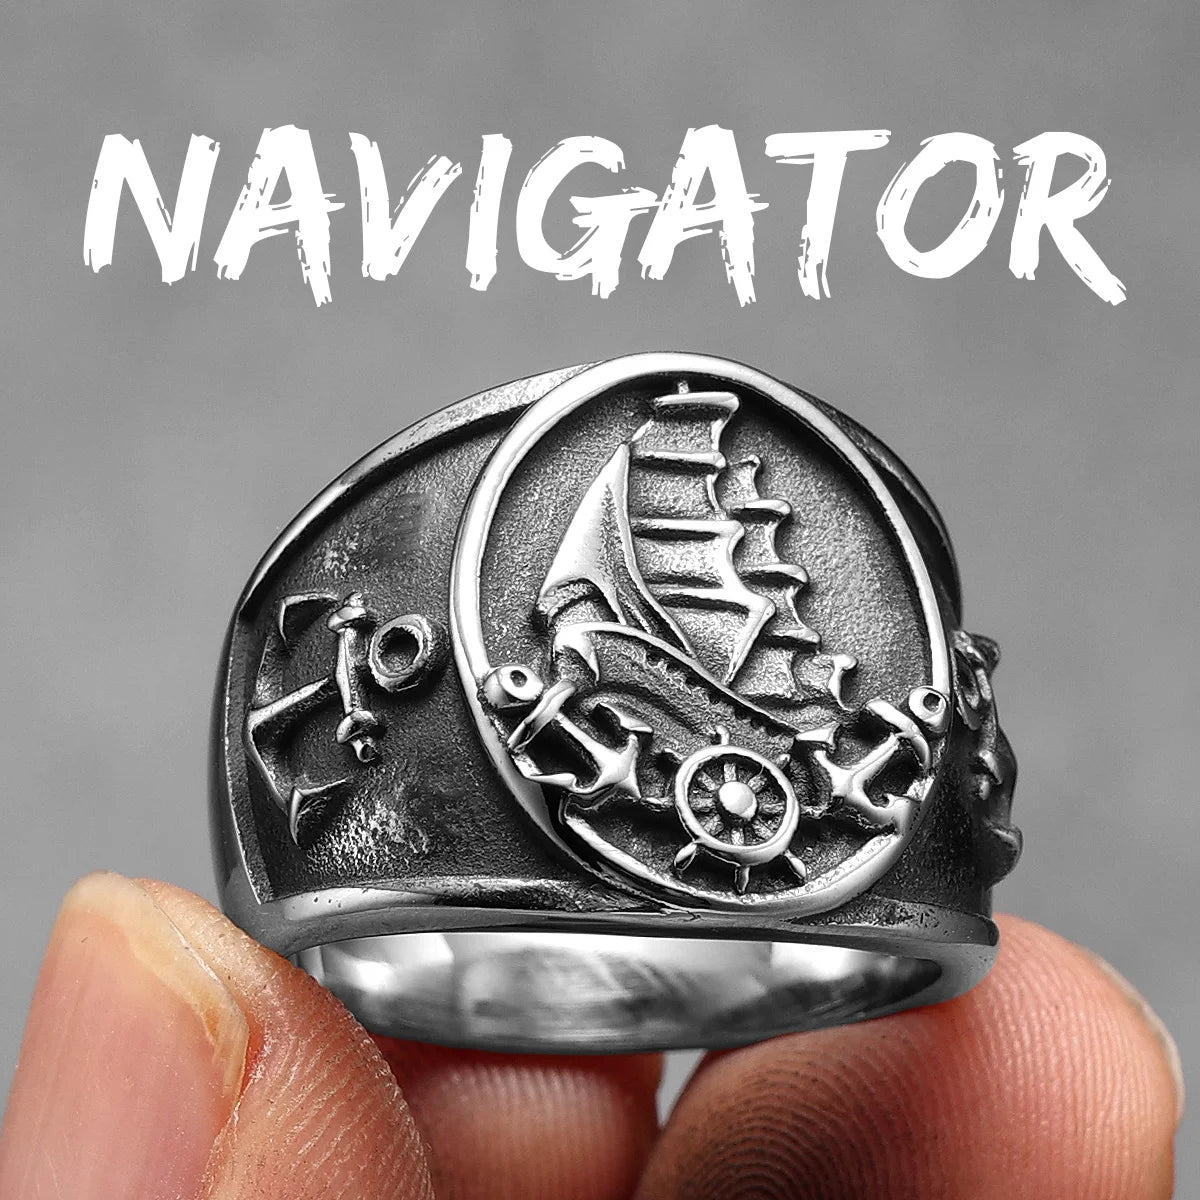 Anchor Lighthouse Ocean Sailor Ship Men Rings Stainless Steel Women Jewelry Vintage Punk Rock Fashion Accessories Gift R1200-Navigator